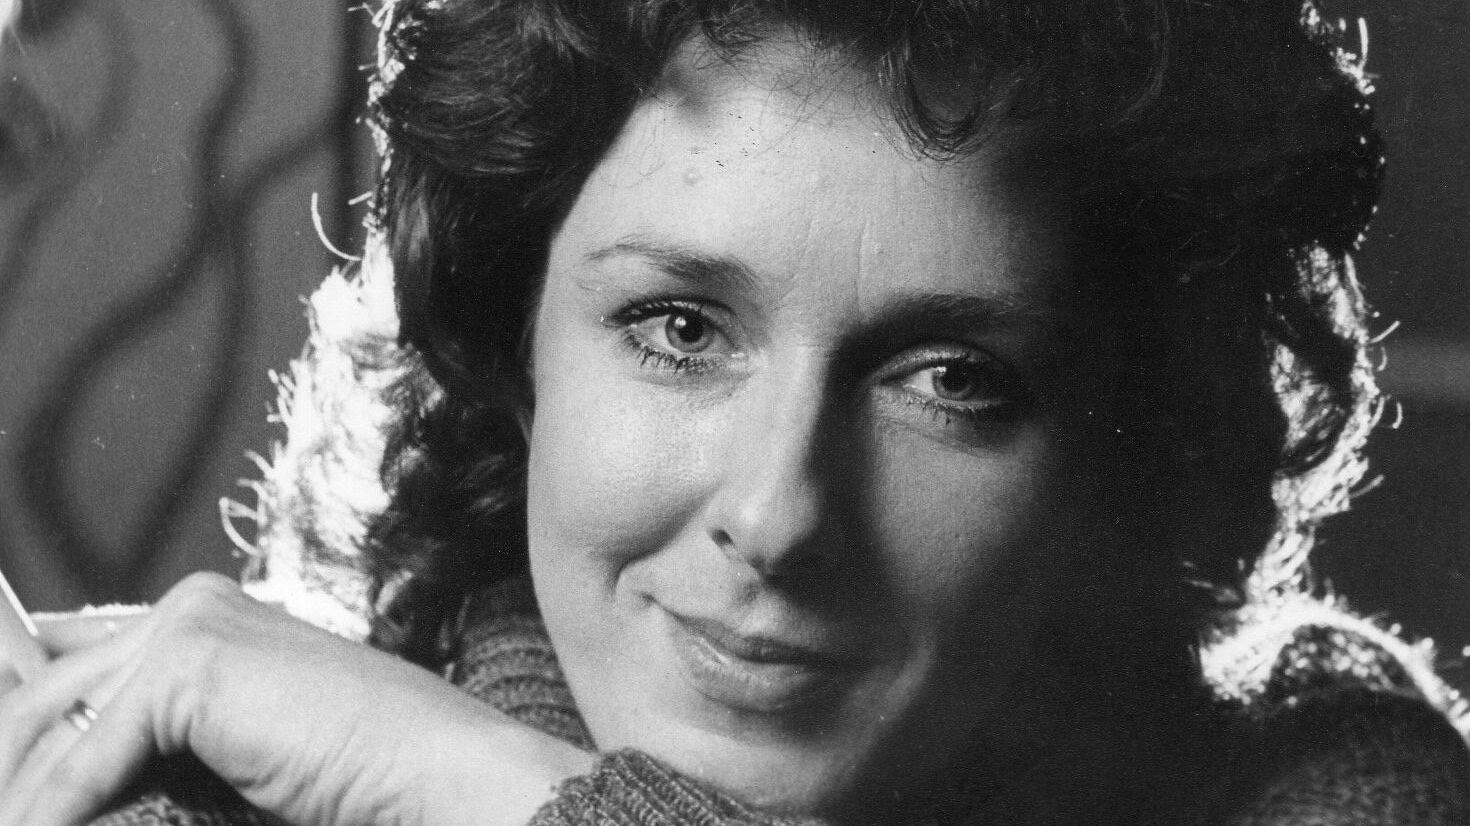 The late Maureen Thornton well known actress who died in 2011 and author of Parallel Lives